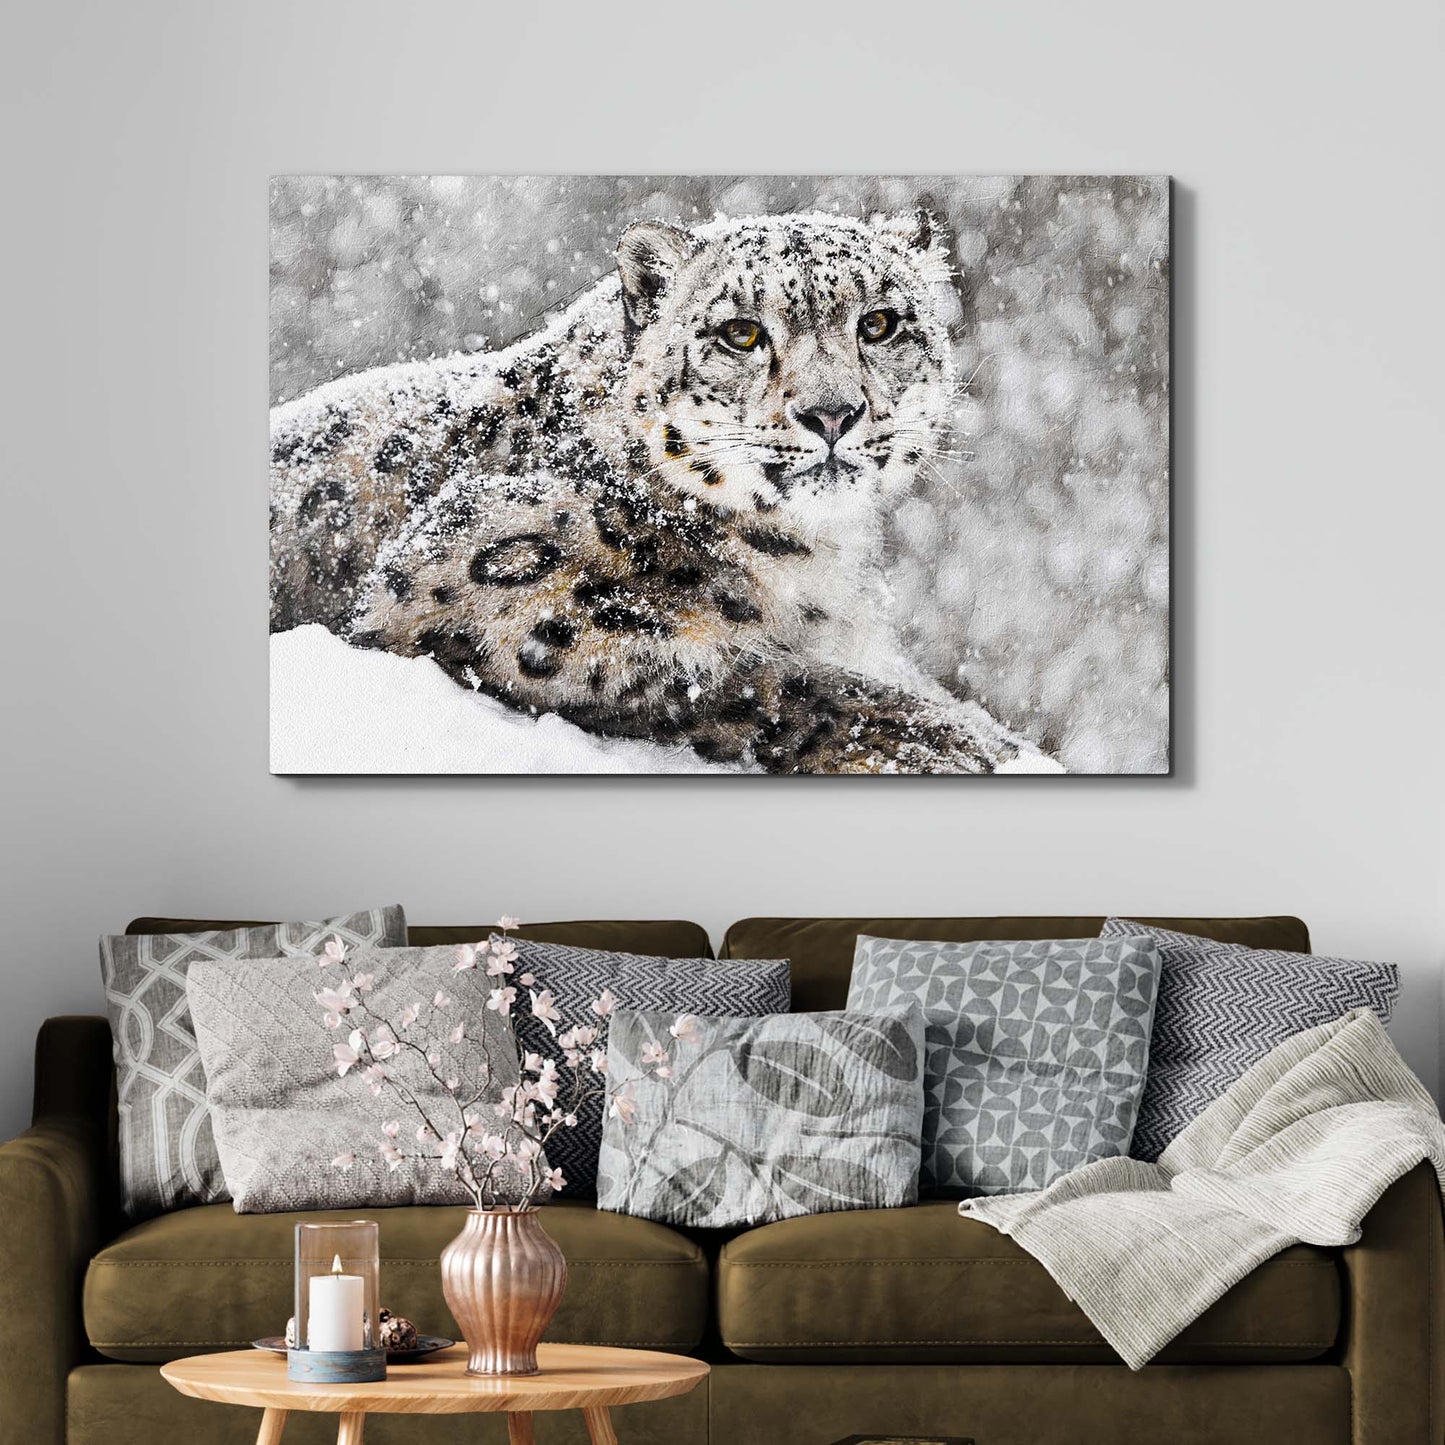 Snow Leopard In Blizzard Canvas Wall Art - Image by Tailored Canvases